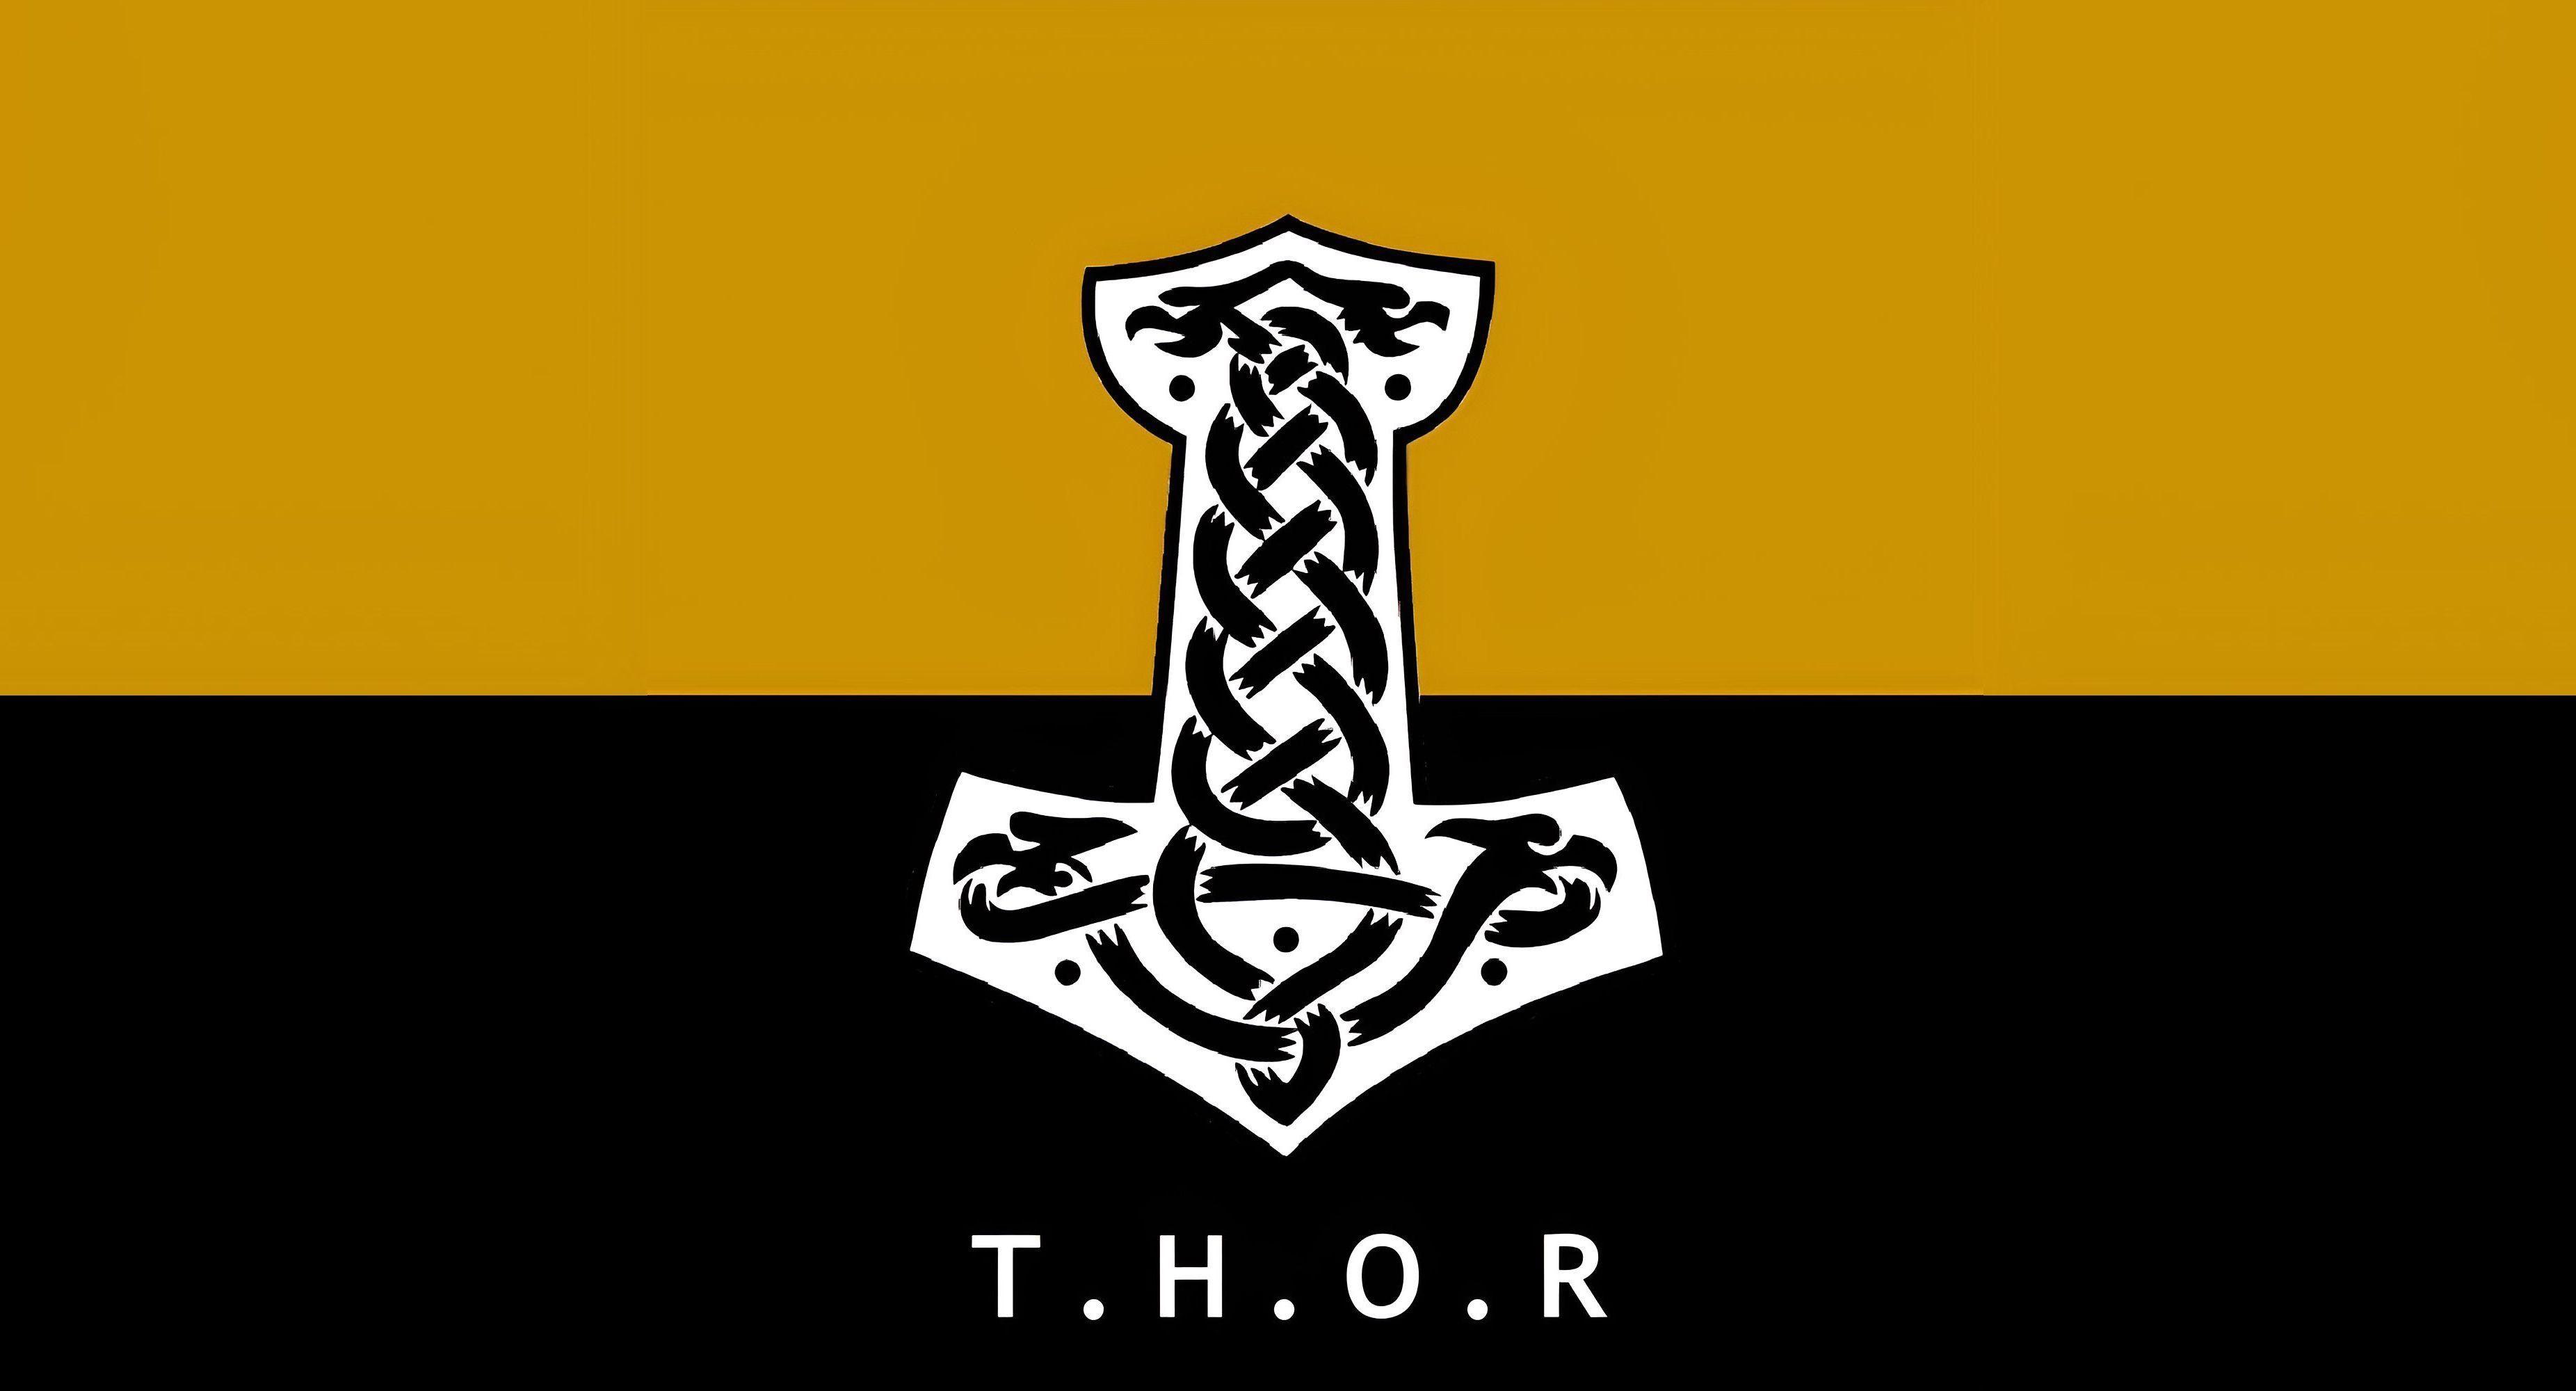 T.H.O.R PMC Patches